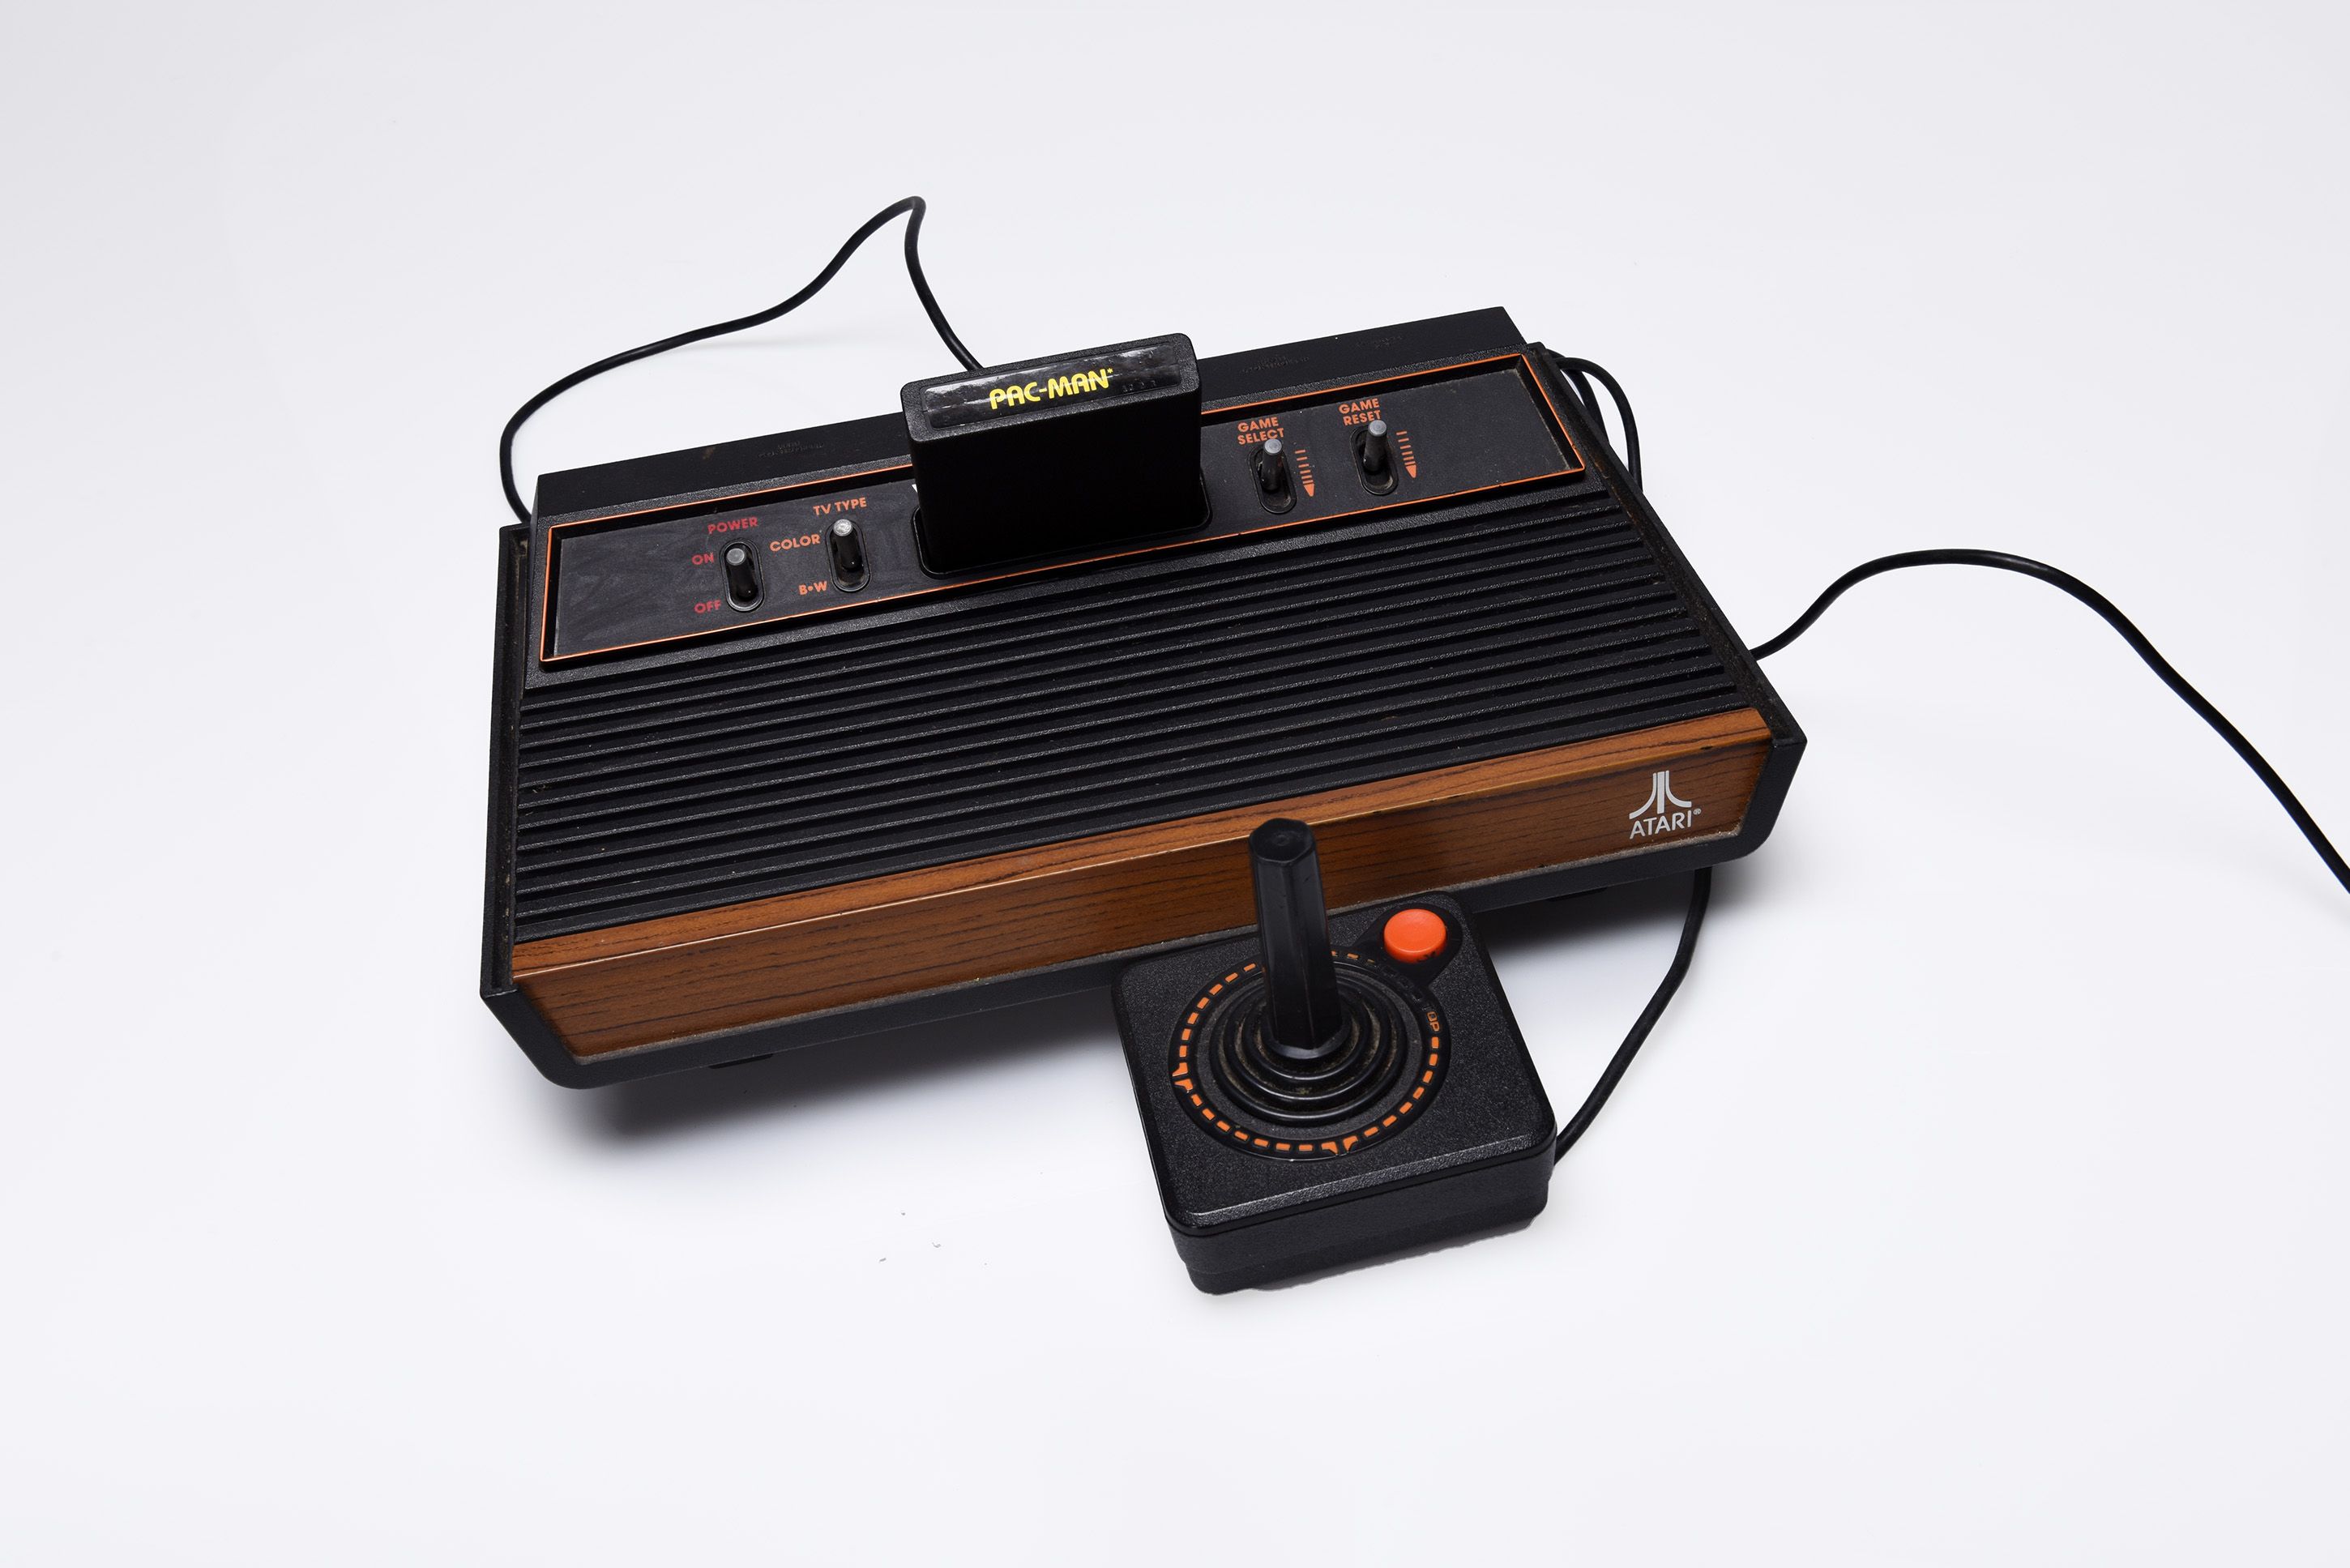 History of the Atari Video System